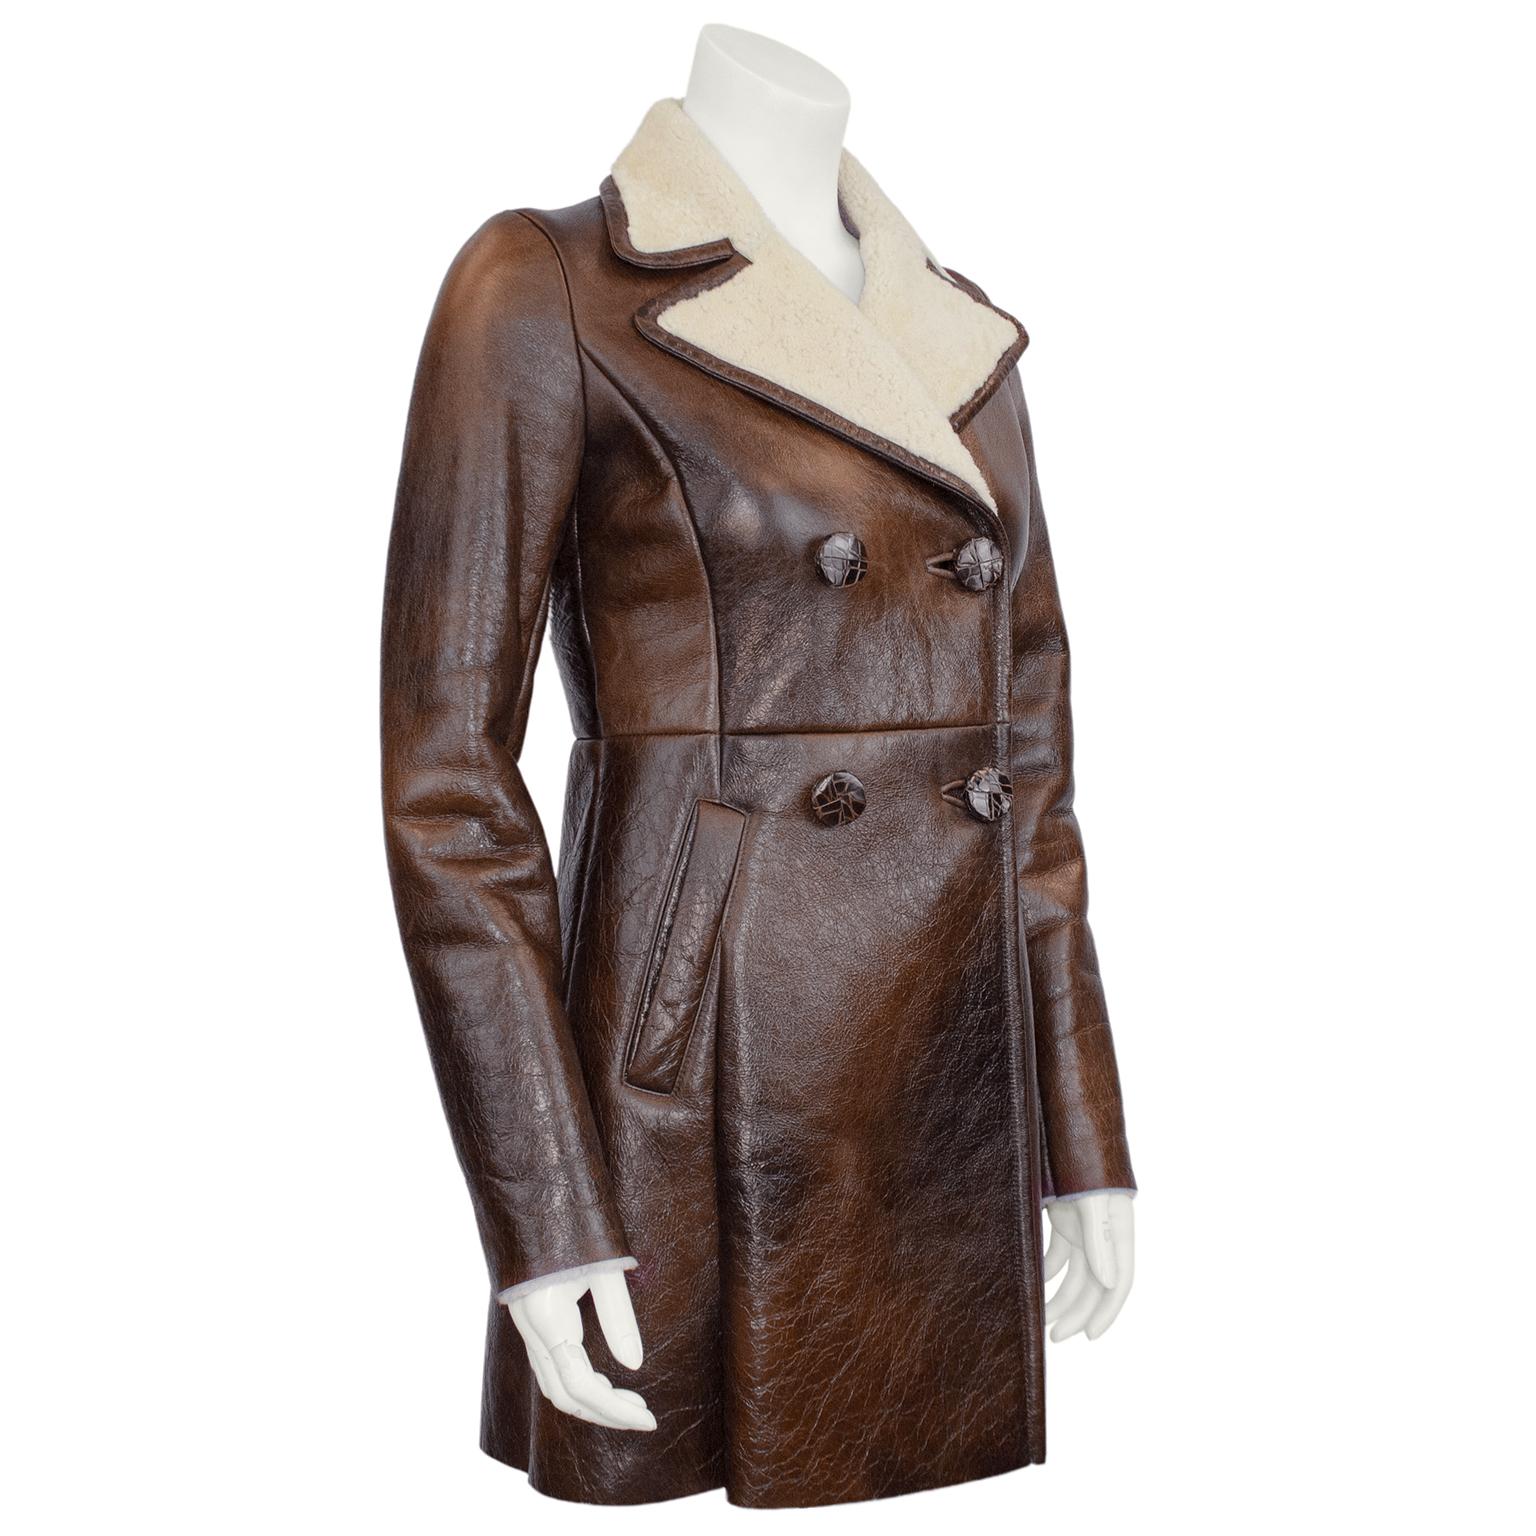 Beautiful Prada coat from the early 2000s. Distressed rich brown leather with contrasting cream shearling collar and interior. Double breasted with brown alligator buttons that look like reptile skin and diagonal slit pockets. Lovely seaming that